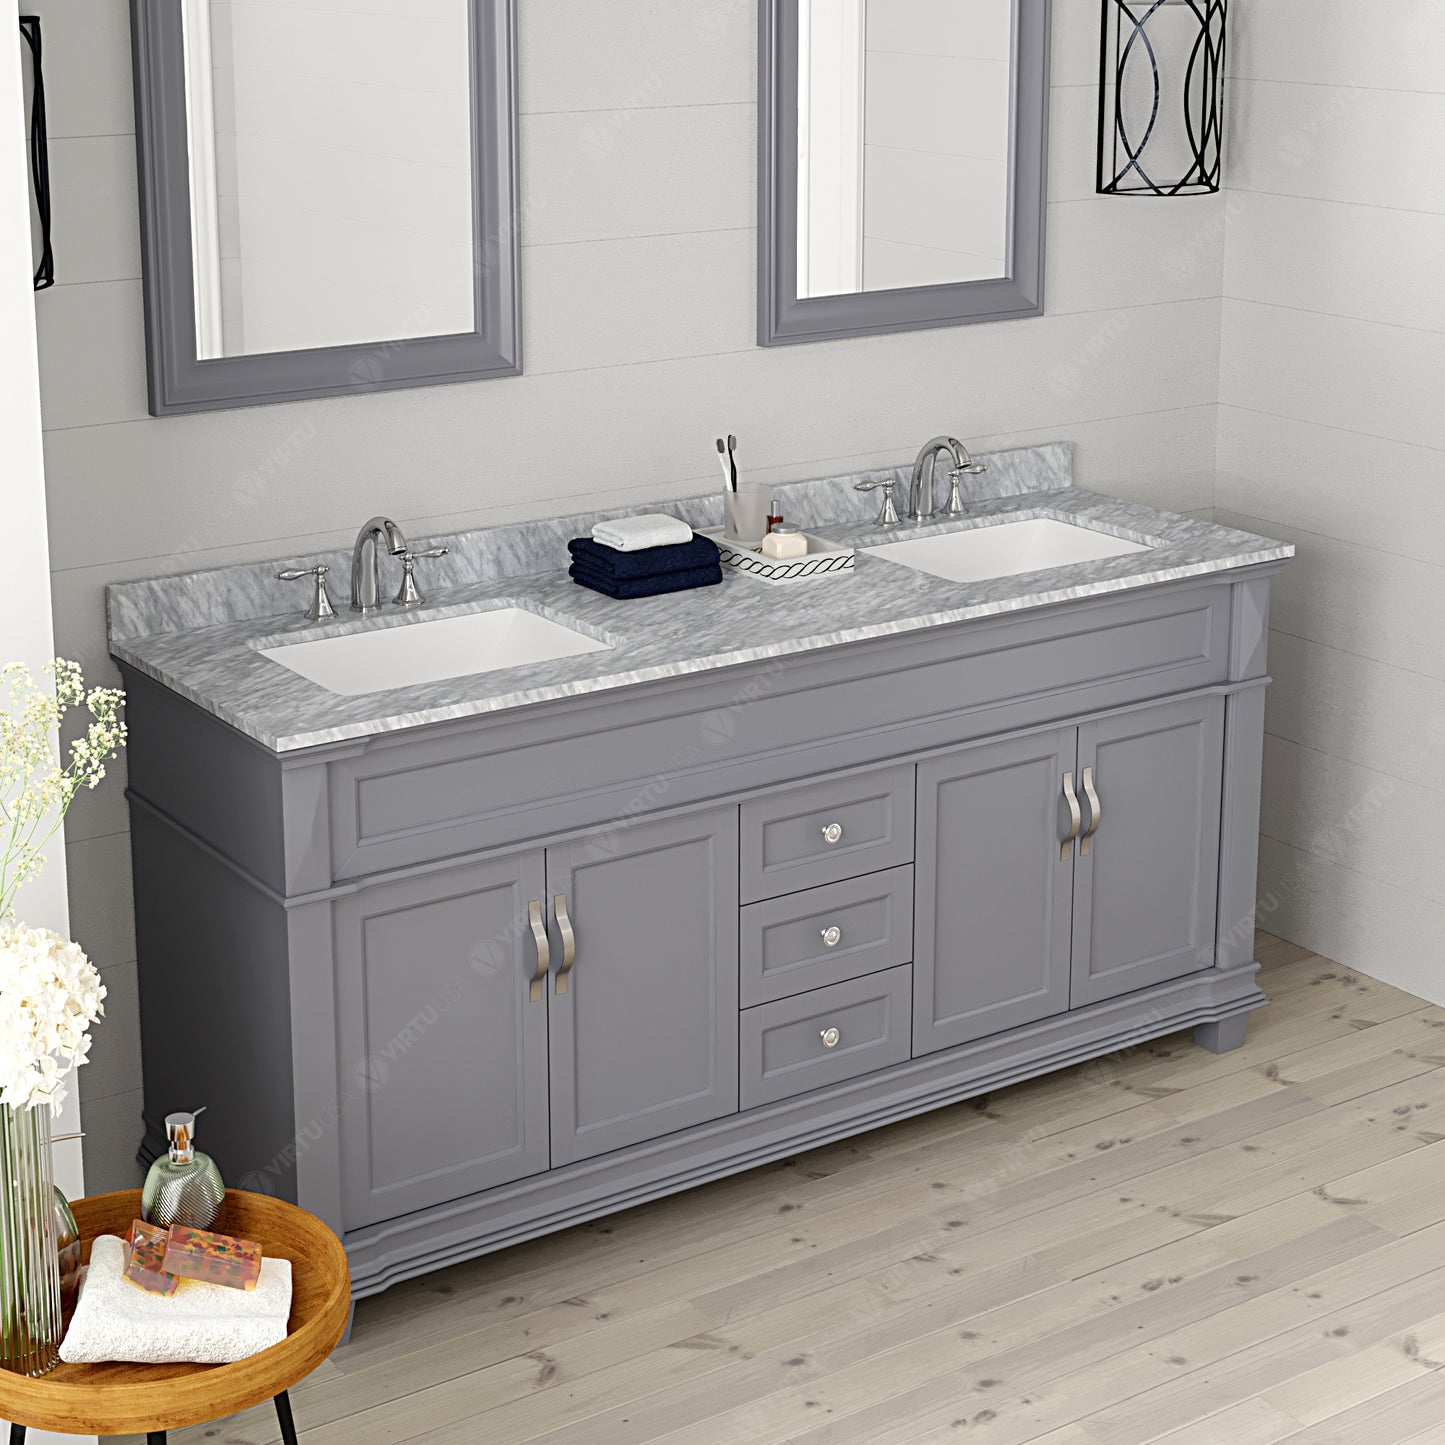 Virtu USA Victoria 72" Double Bath Vanity with White Marble Top and Square Sinks with Brushed Nickel Faucets with Matching Mirror - Luxe Bathroom Vanities